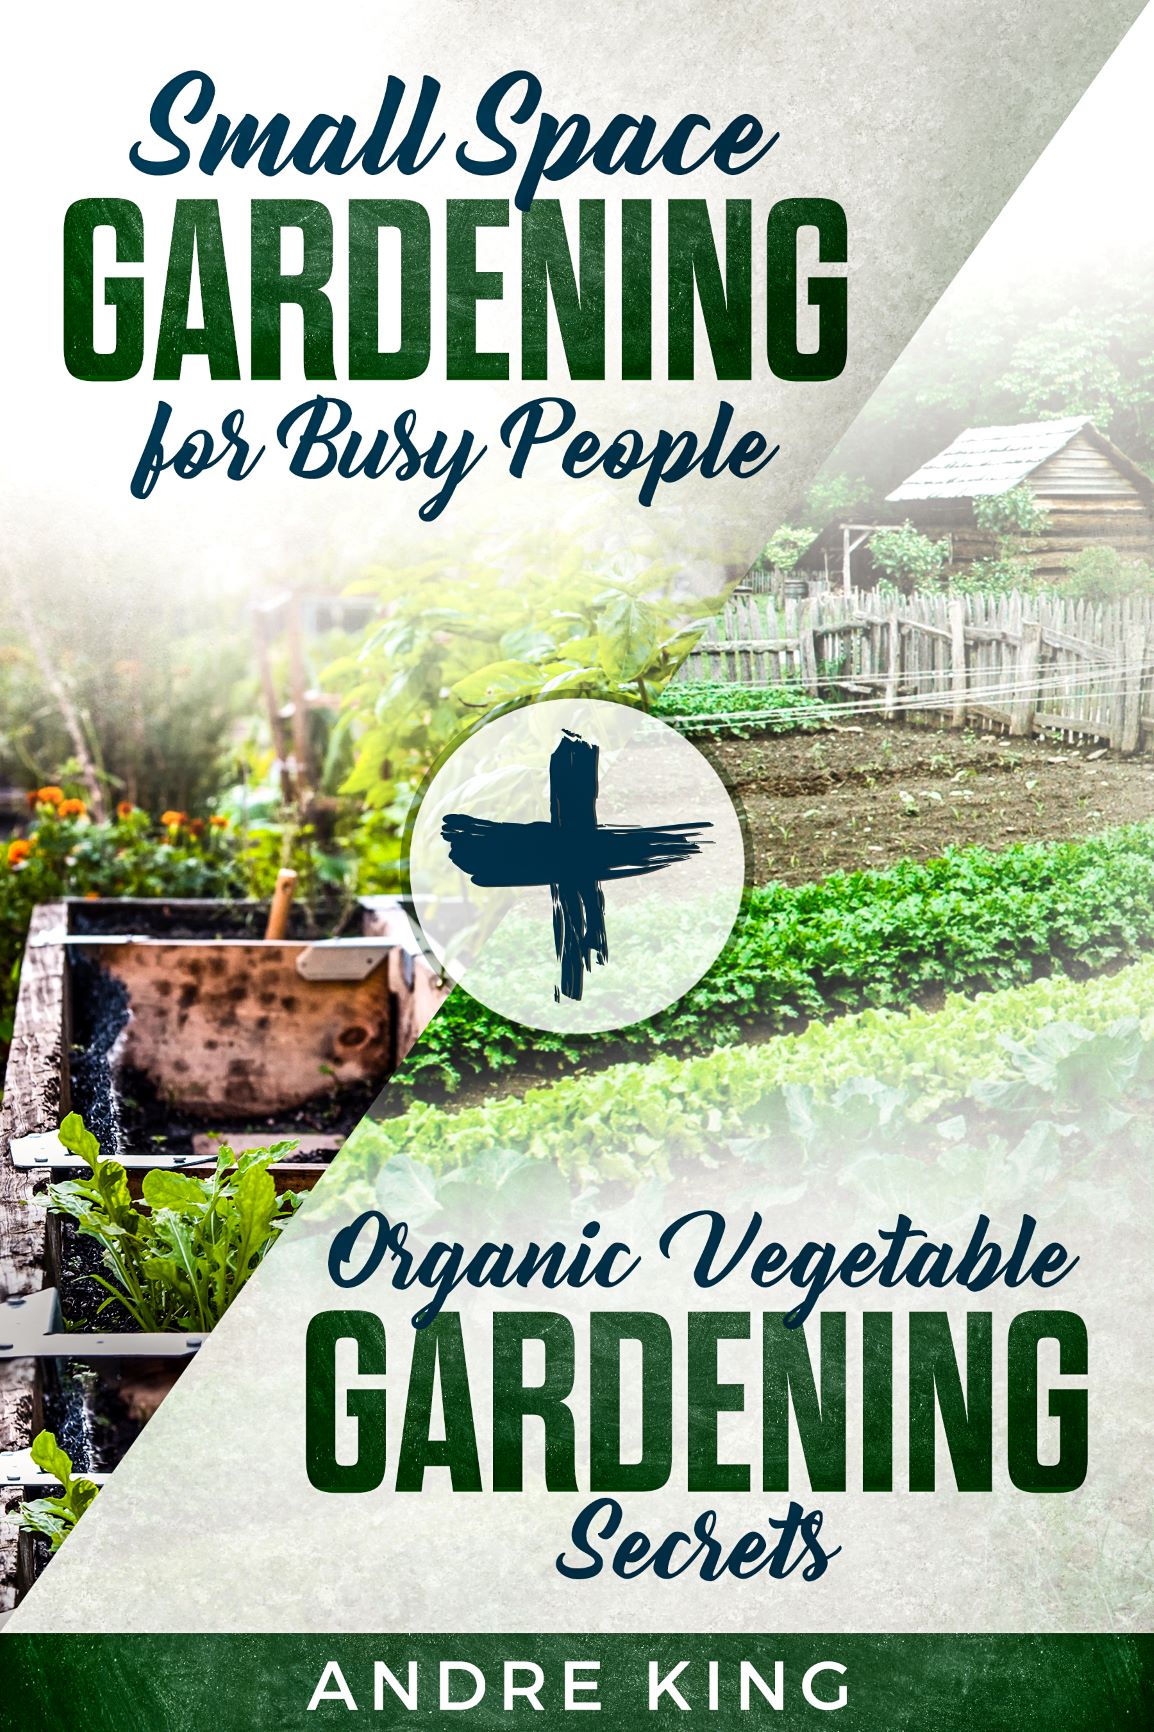 FREE: Small Space Gardening for Busy People : + Organic Vegetable Gardening Secrets by Andre King